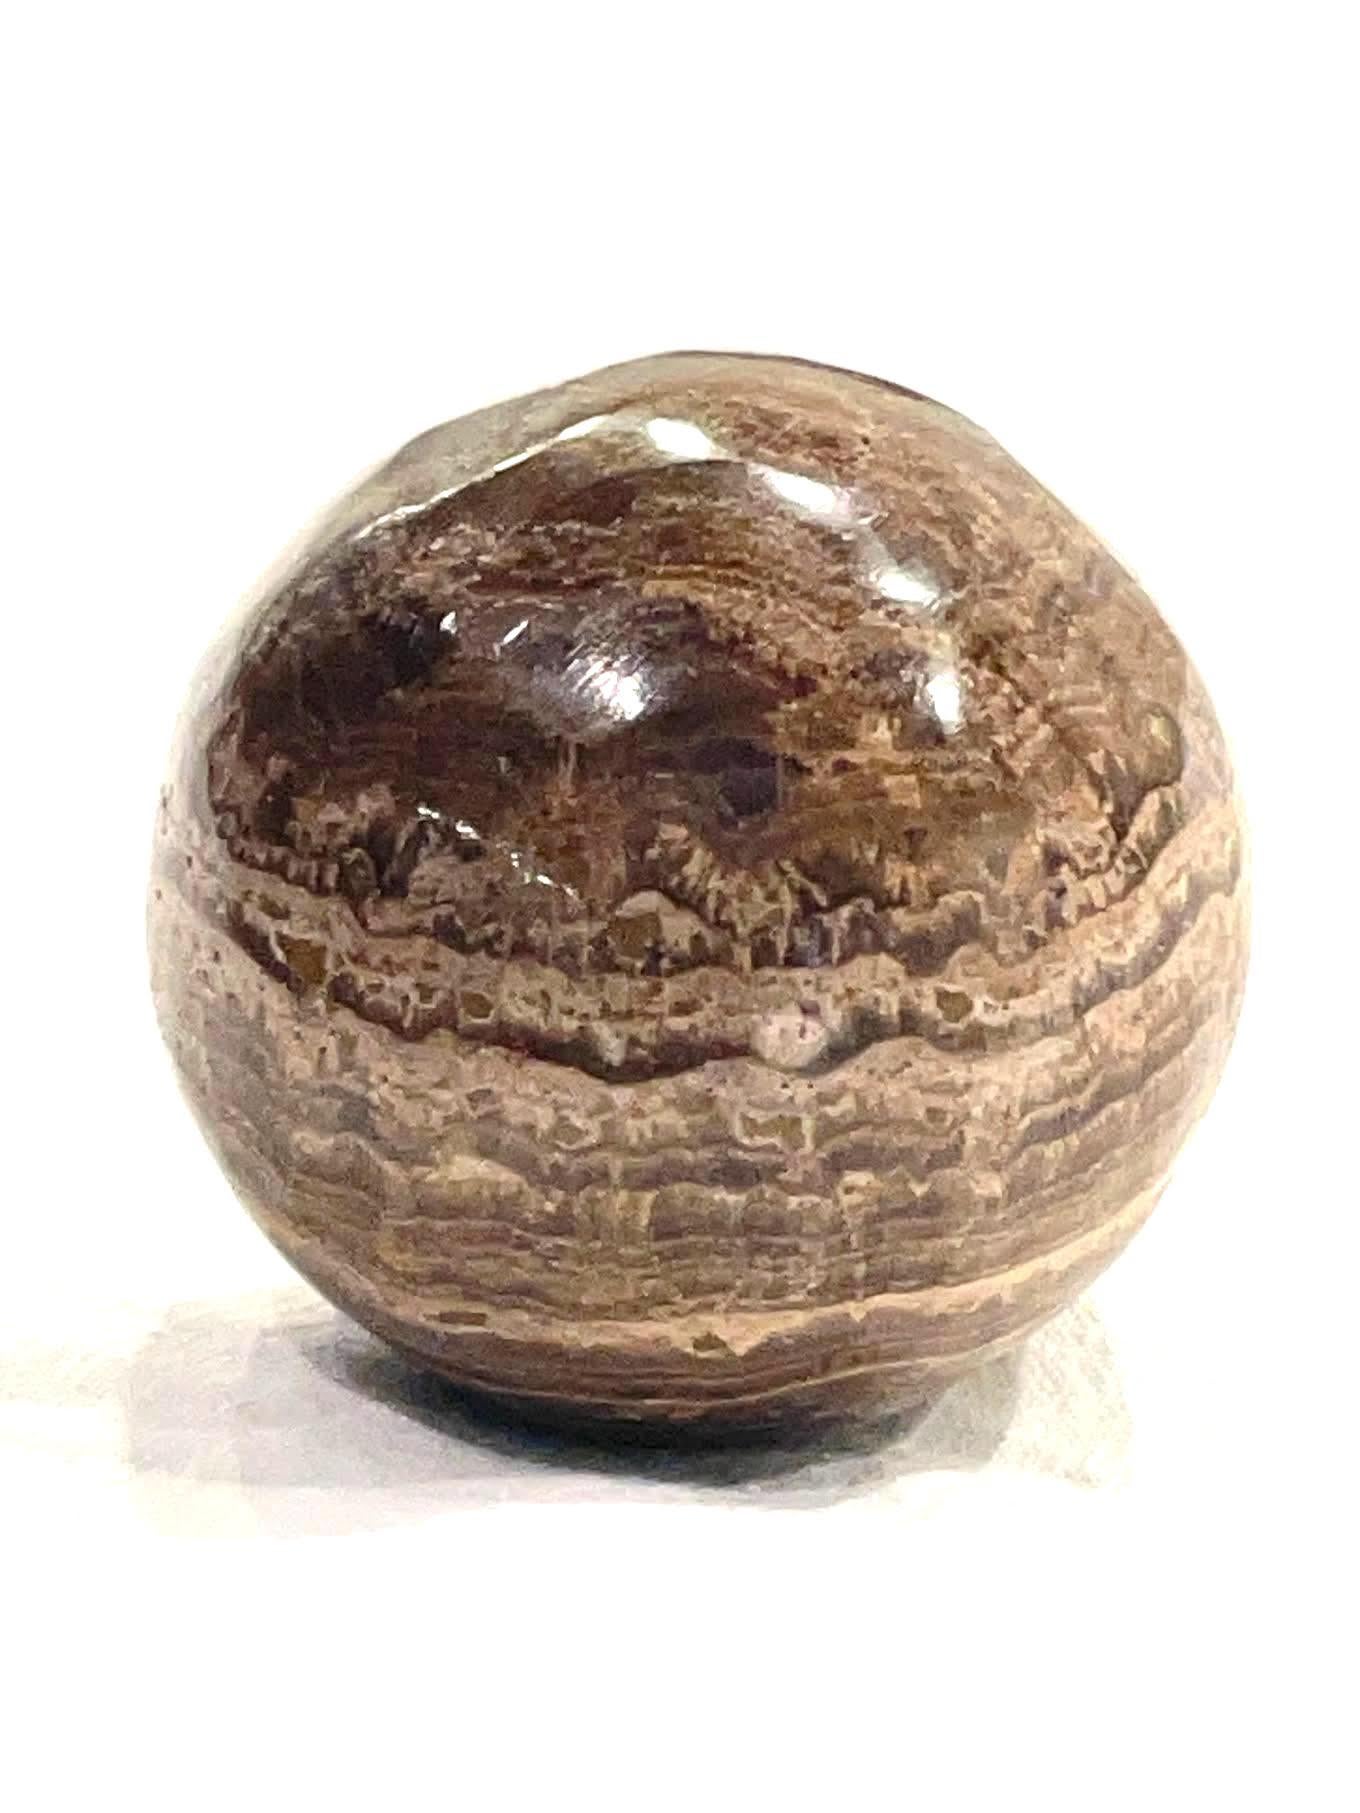 Contemporary Moroccan polished onyx balls.
Decorative as a collection.
Bowl is not included.